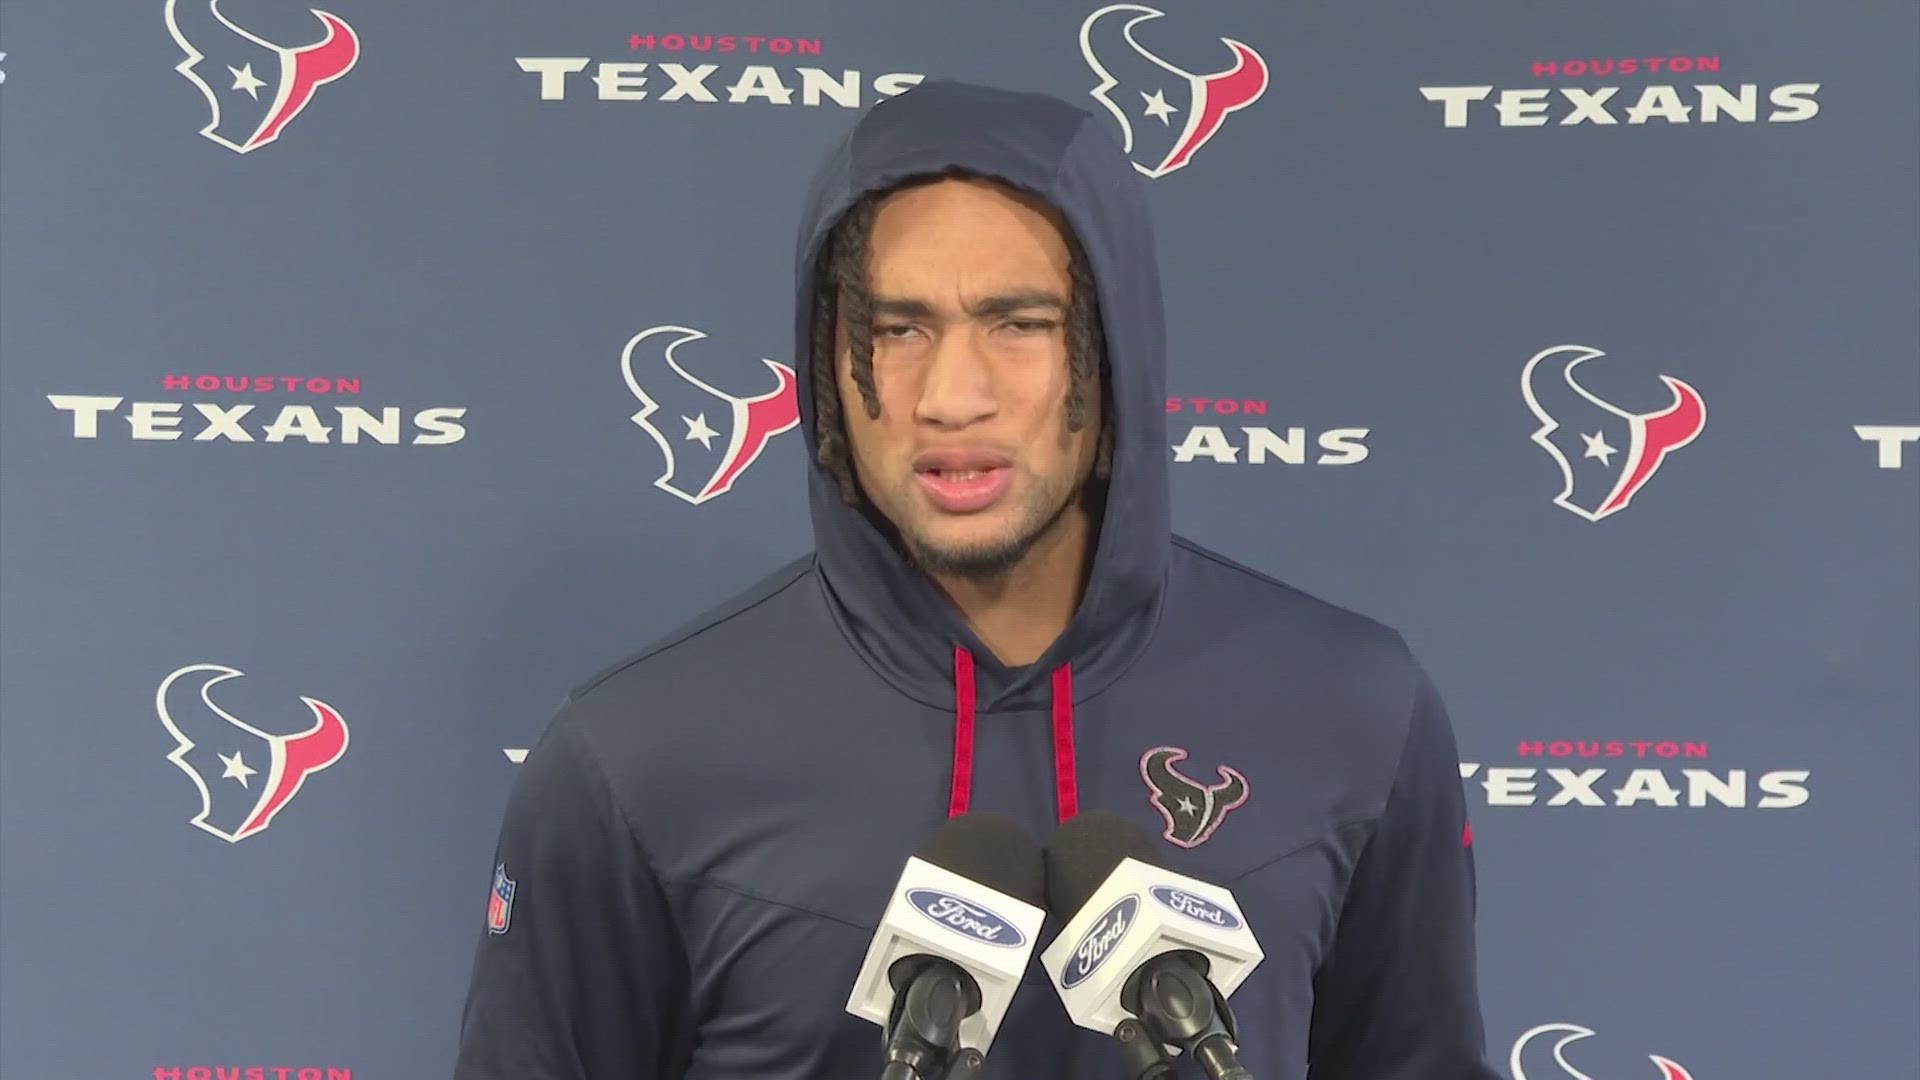 The Texans quarterback talked about the loss to Carolina and what he said the team needs to do.